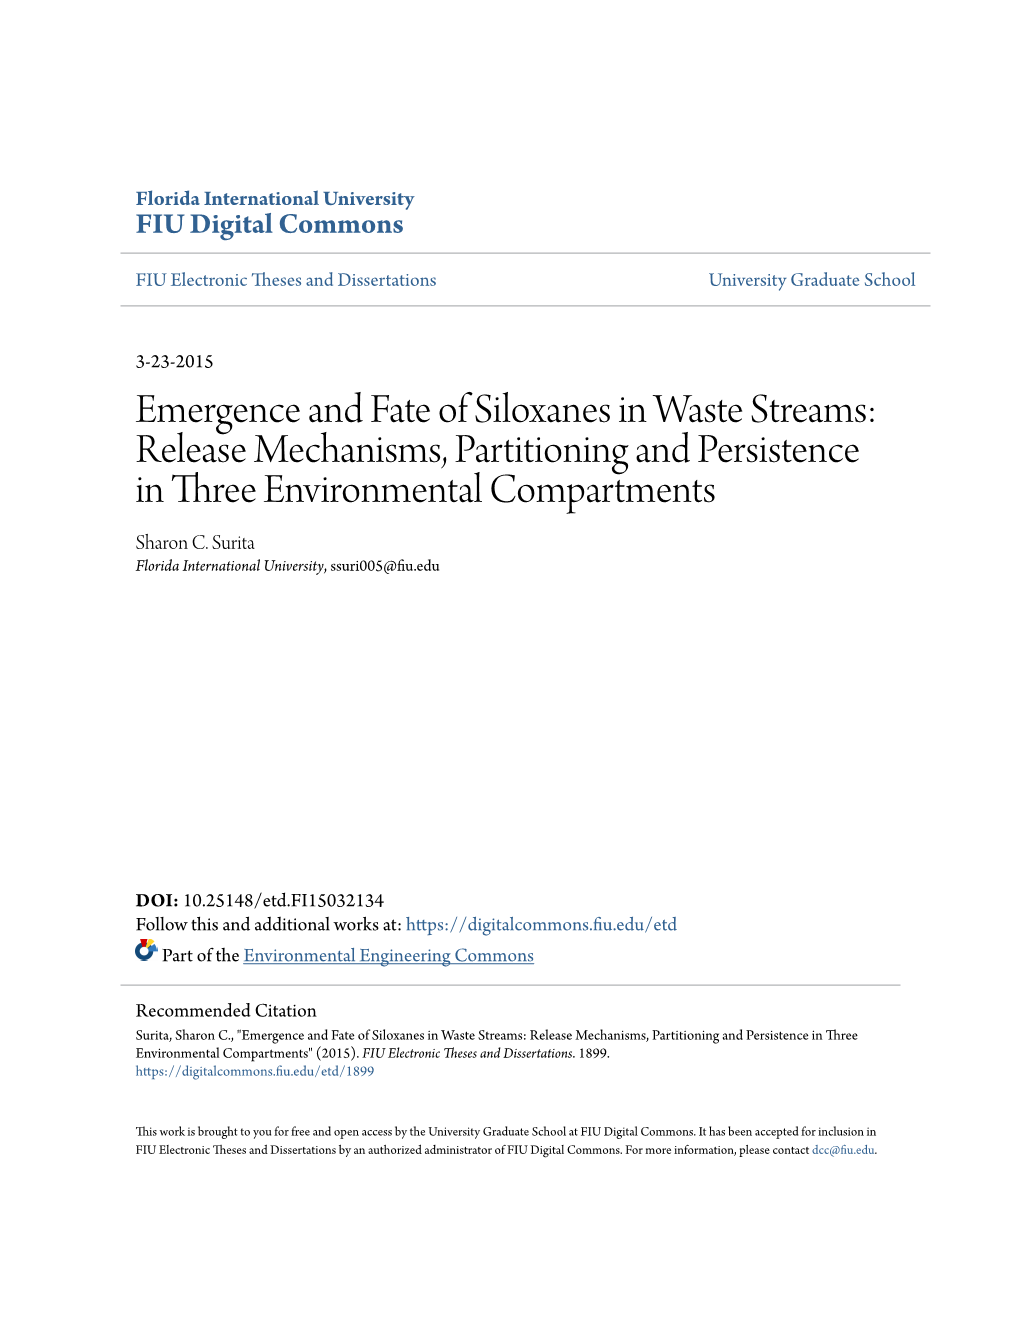 Emergence and Fate of Siloxanes in Waste Streams: Release Mechanisms, Partitioning and Persistence in Three Environmental Compartments Sharon C